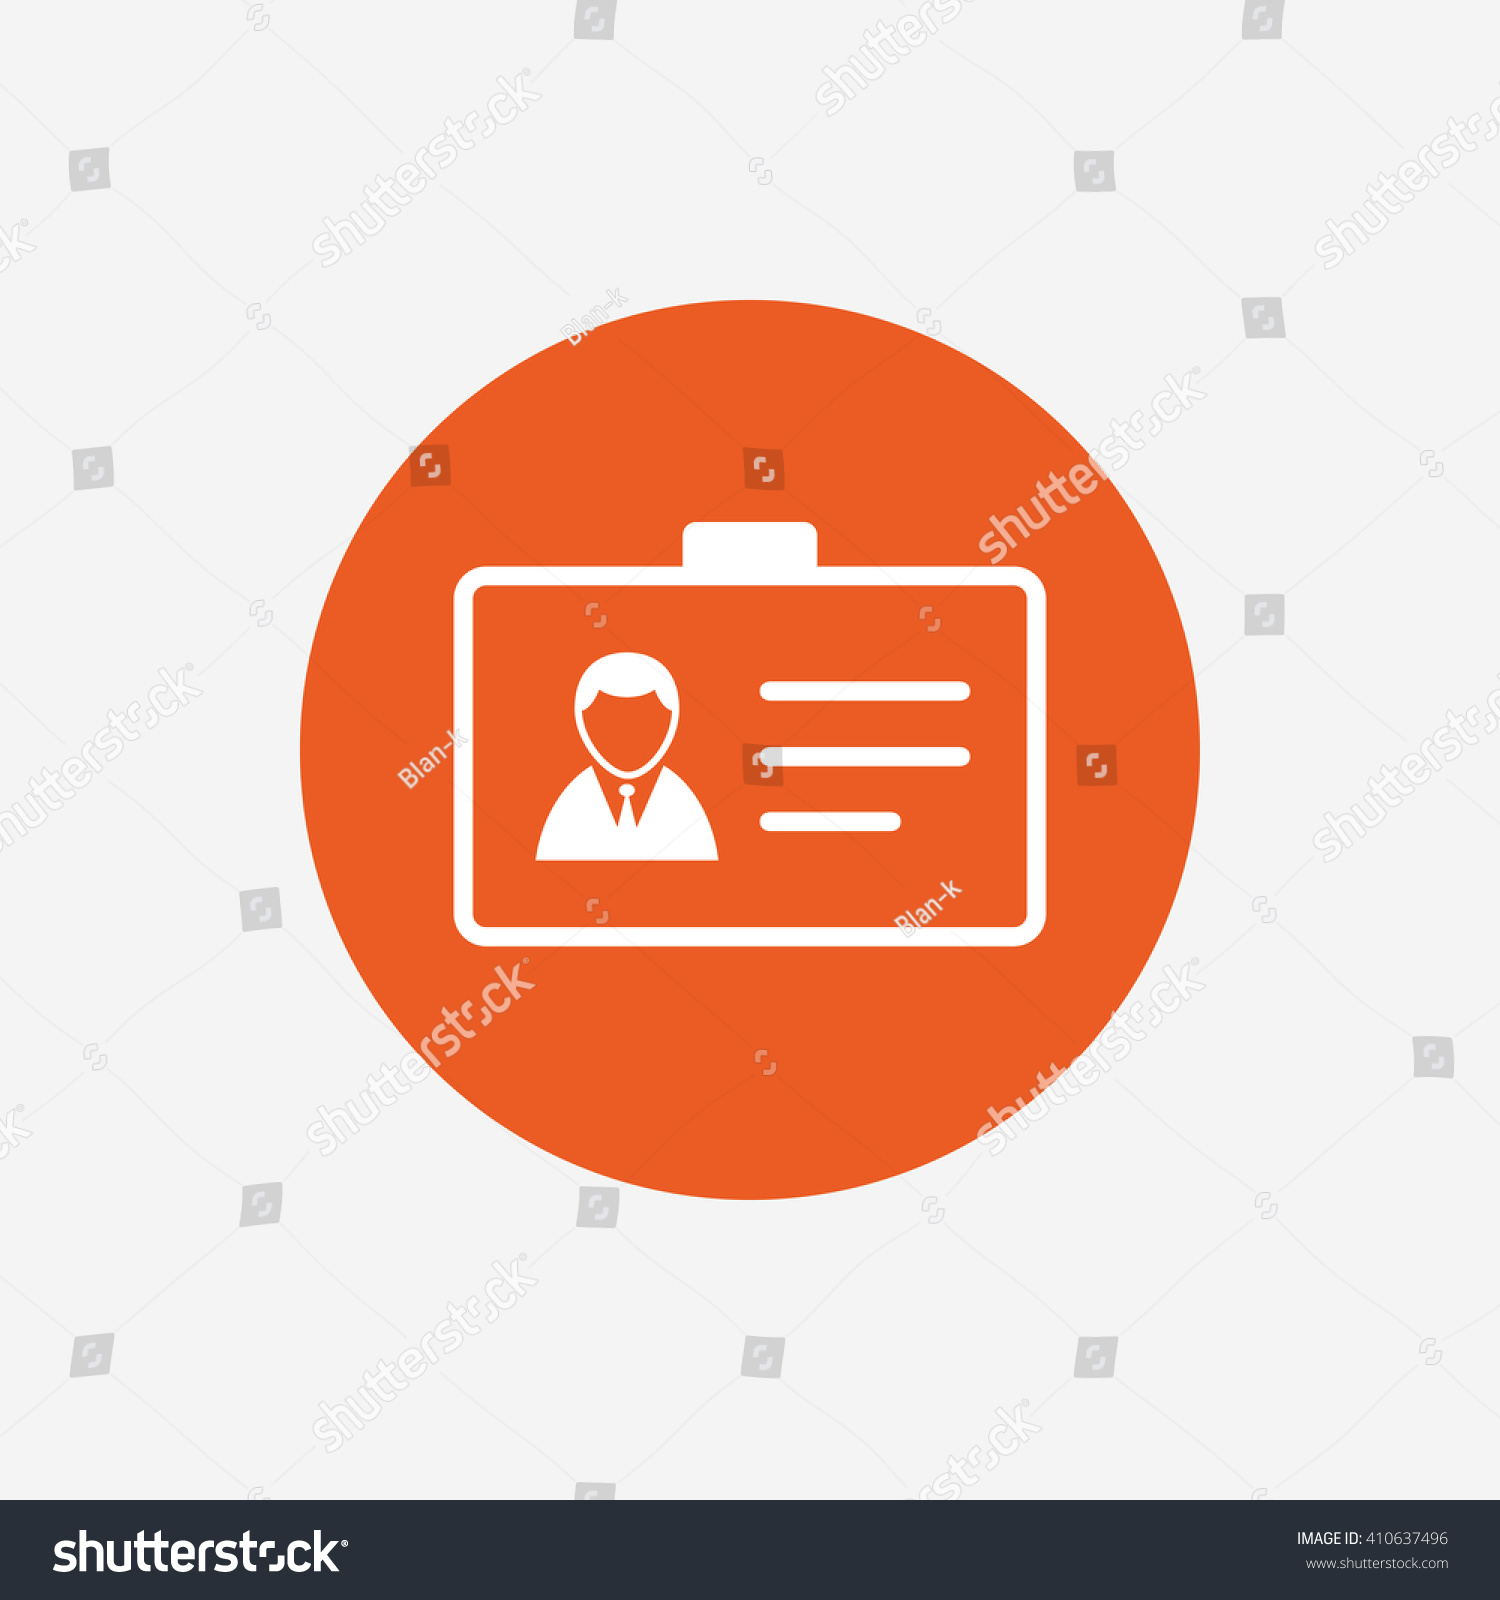 ID card sign icon. Identity card badge symbol. Orange circle button with icon. Vector #410637496